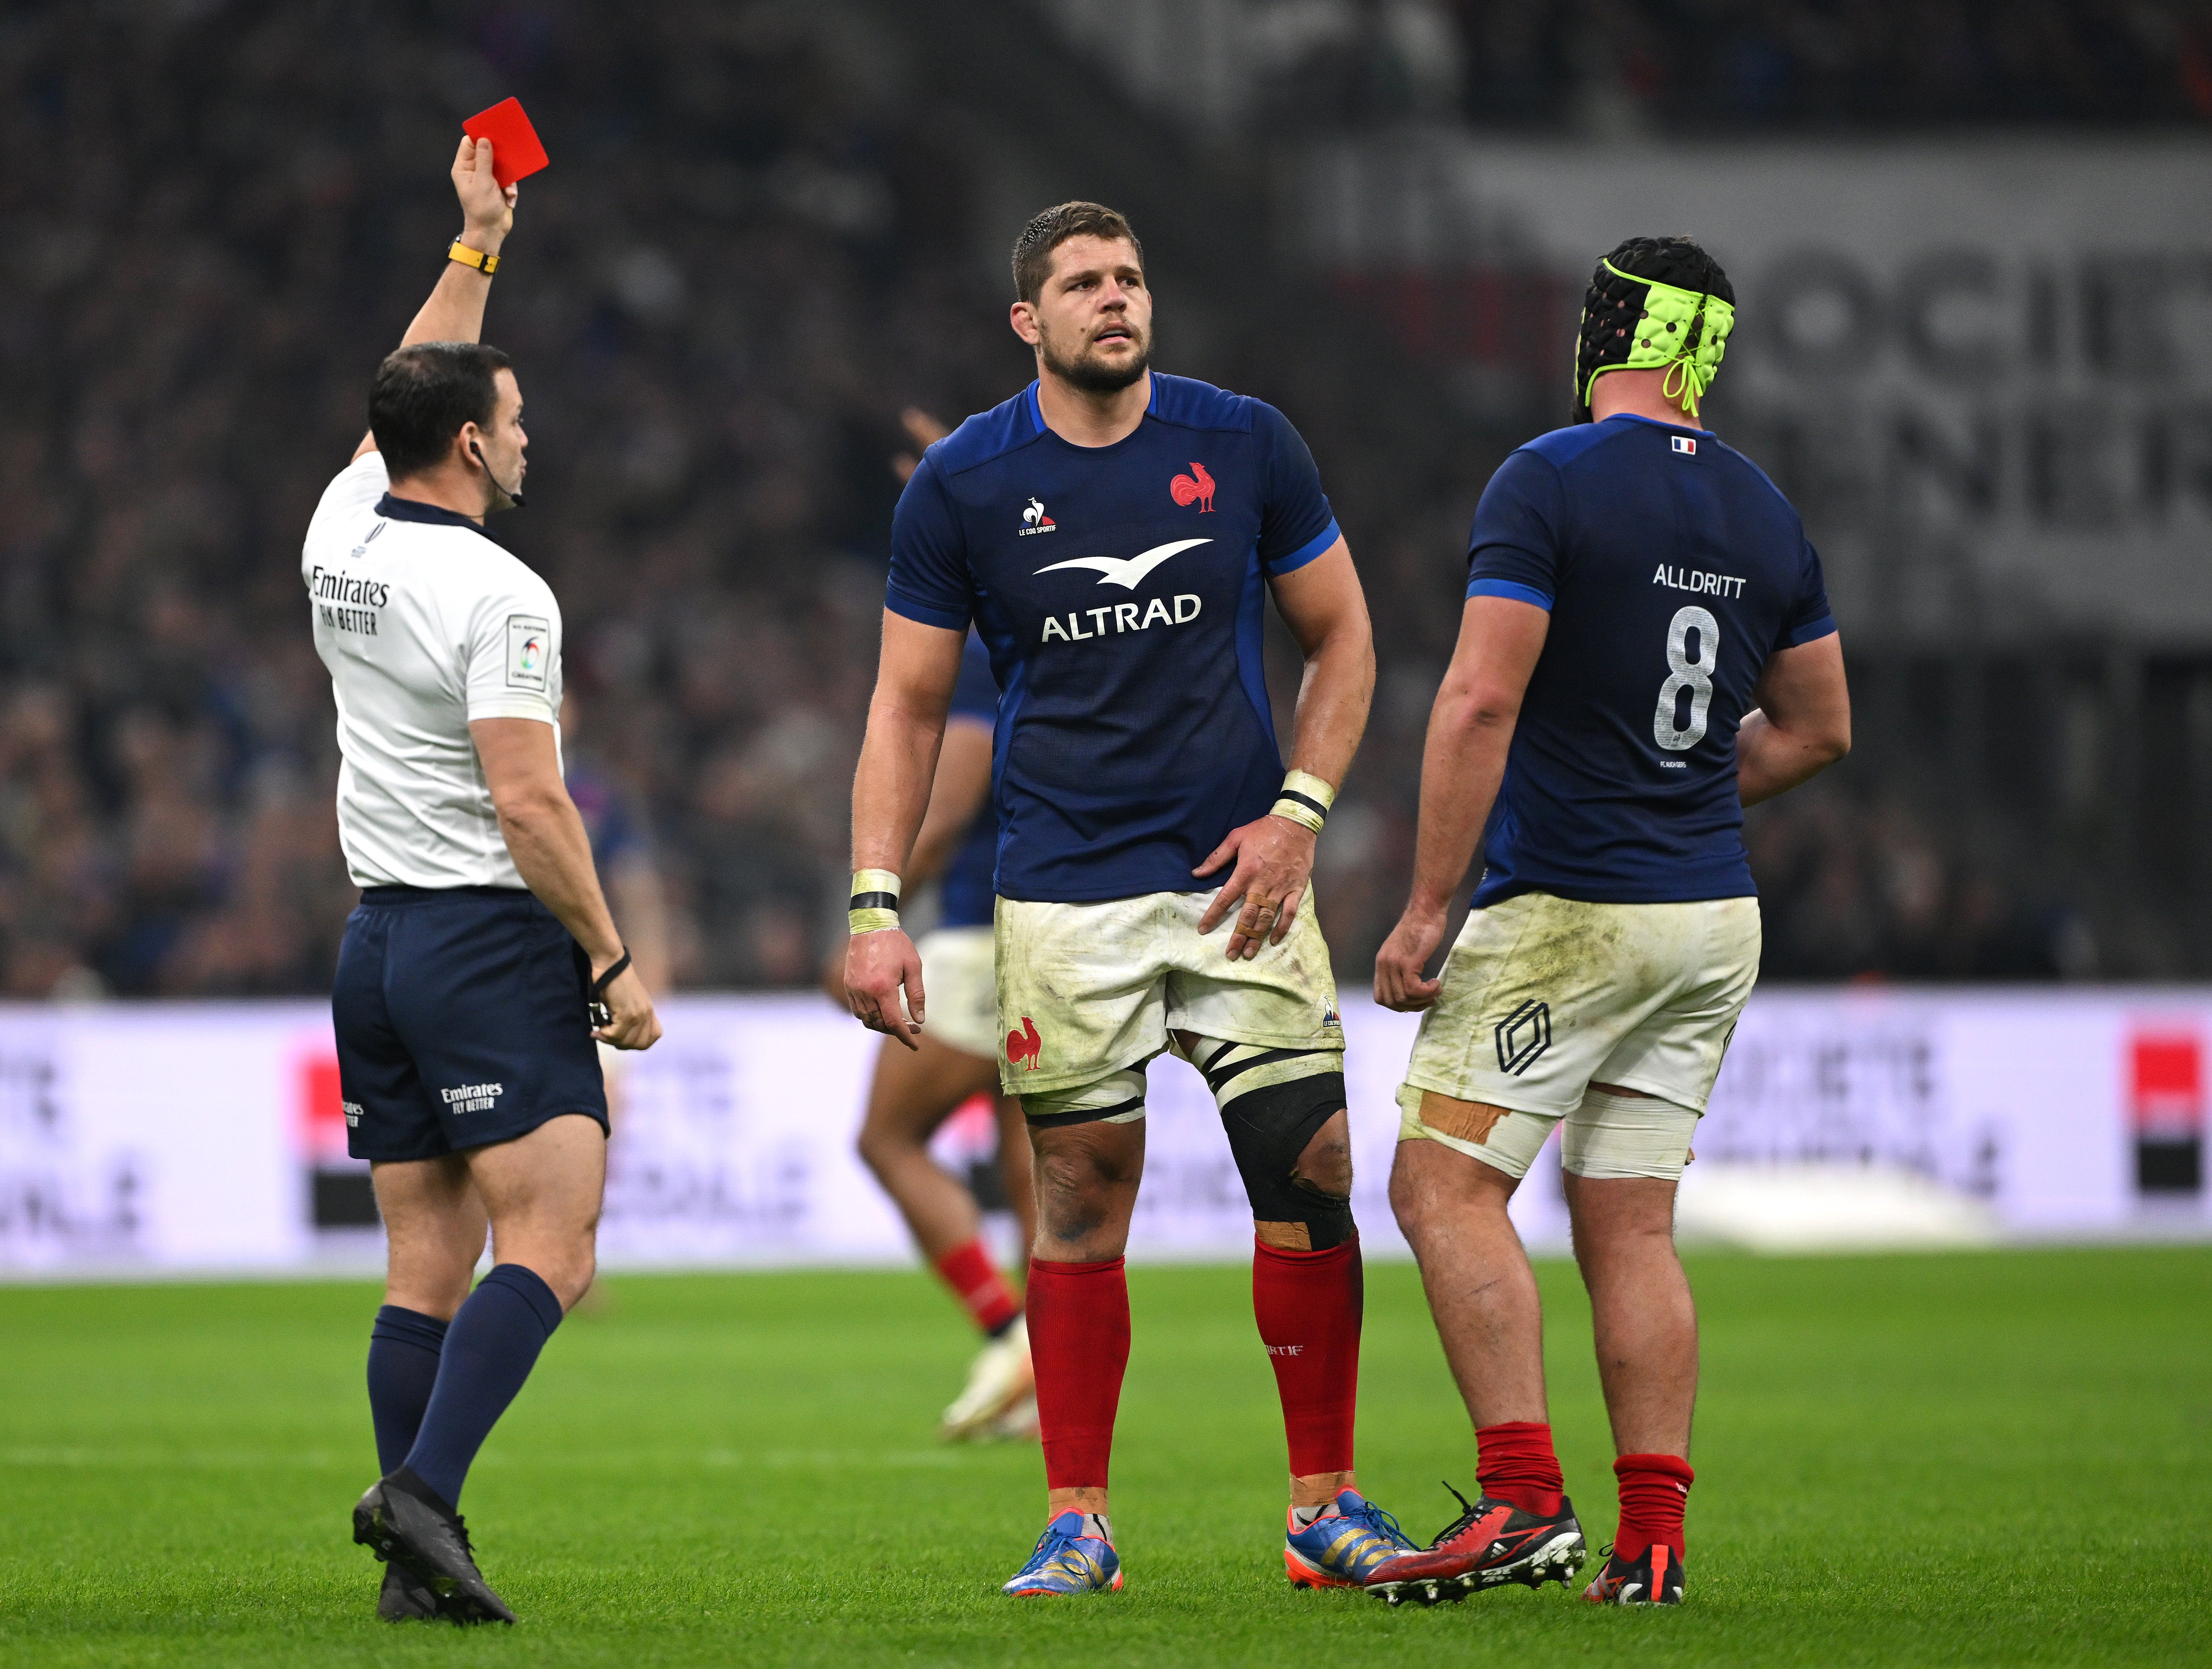 Paul Willemse of France reacts after being shown a red card by referee Karl Dickson